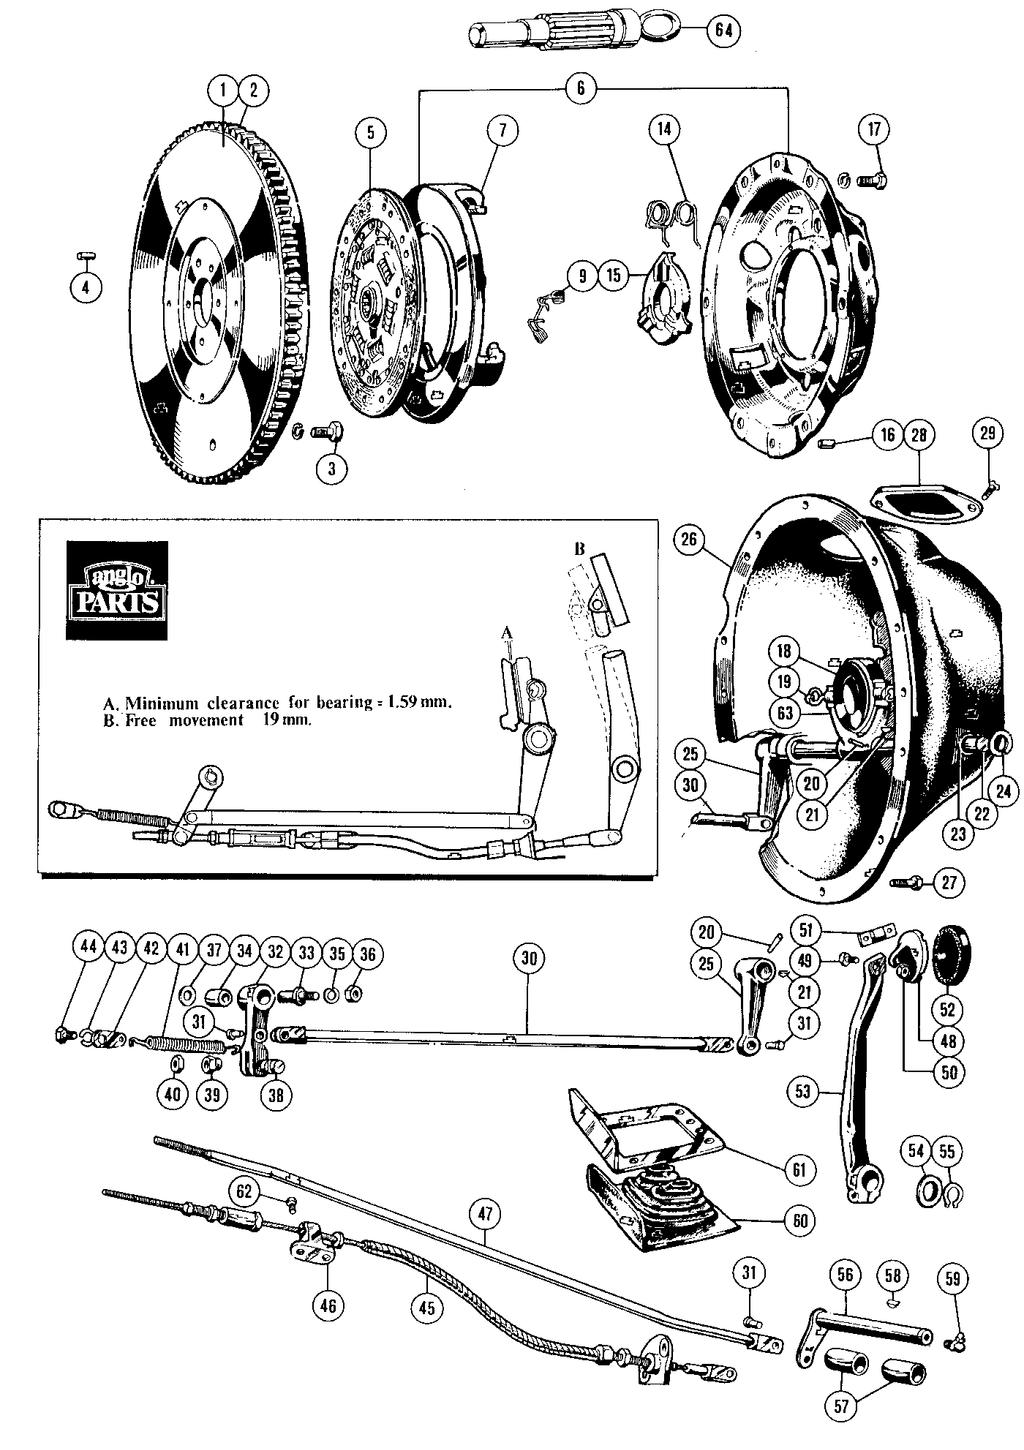 MGTD-TF 1949-1955 - Clutch plates | Webshop Anglo Parts - 1